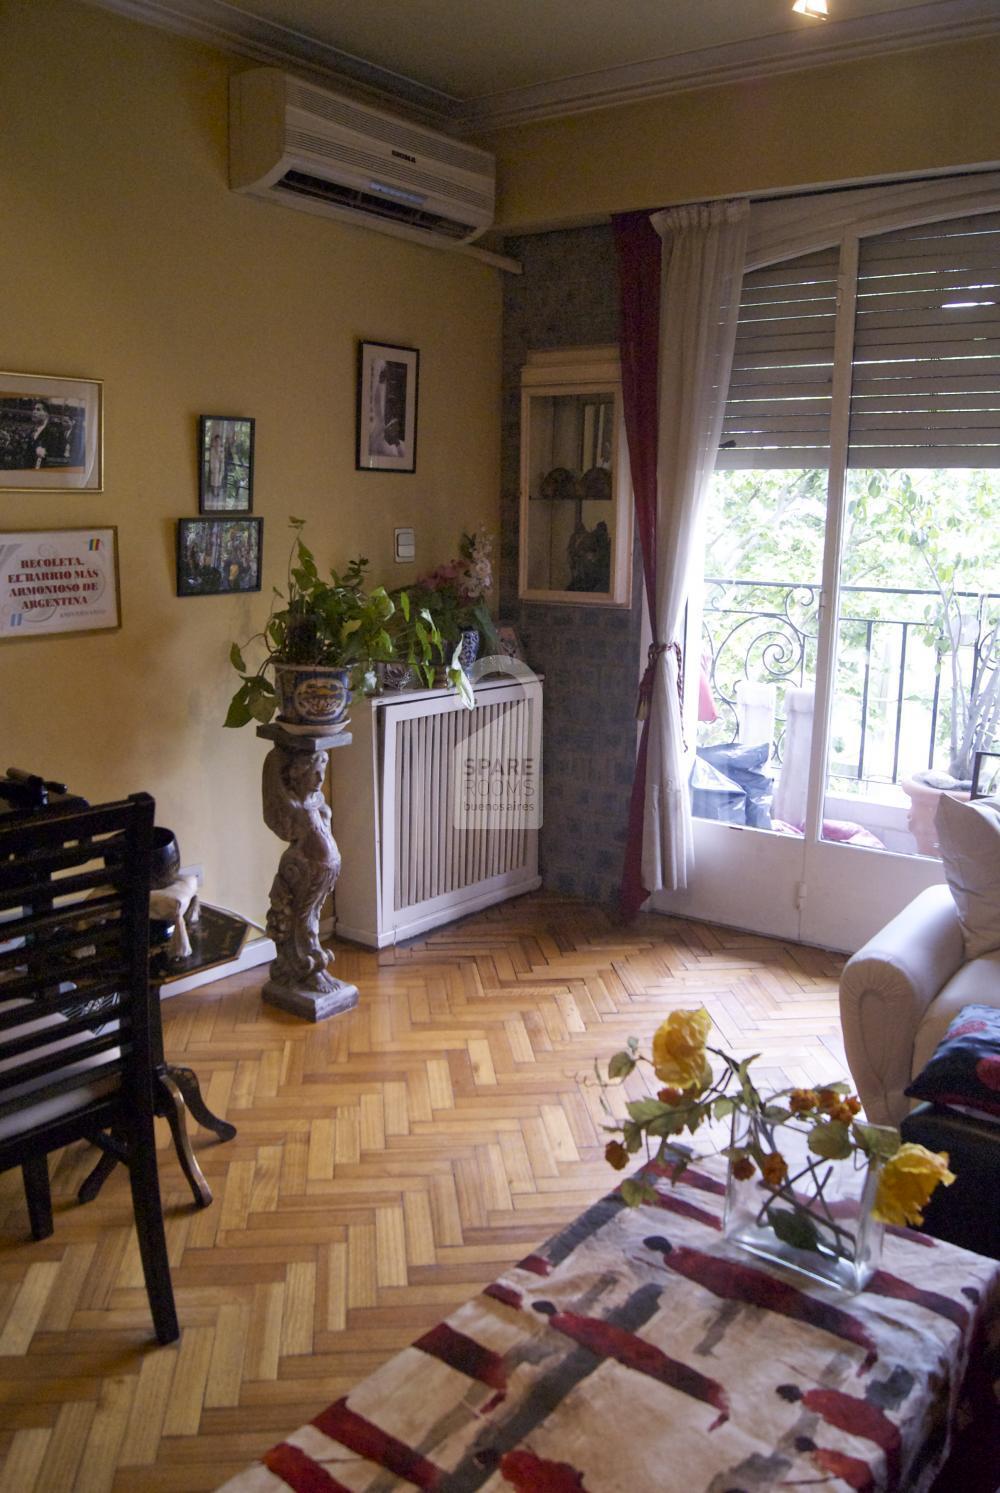 The living room at the apartment in Recoleta